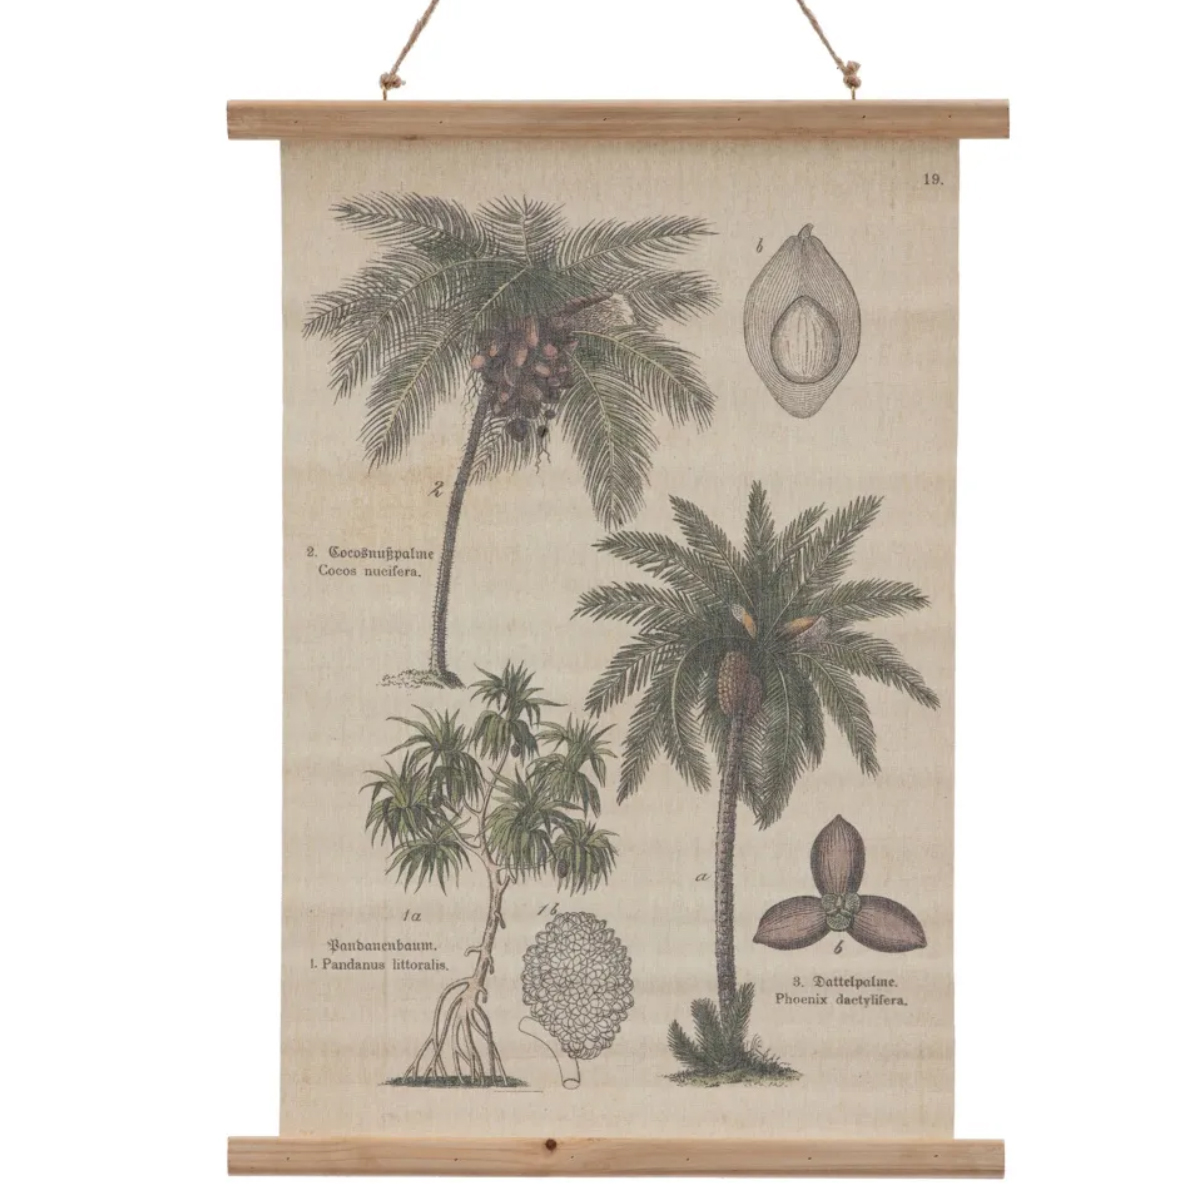 Decorative canvas palm tree for hanging